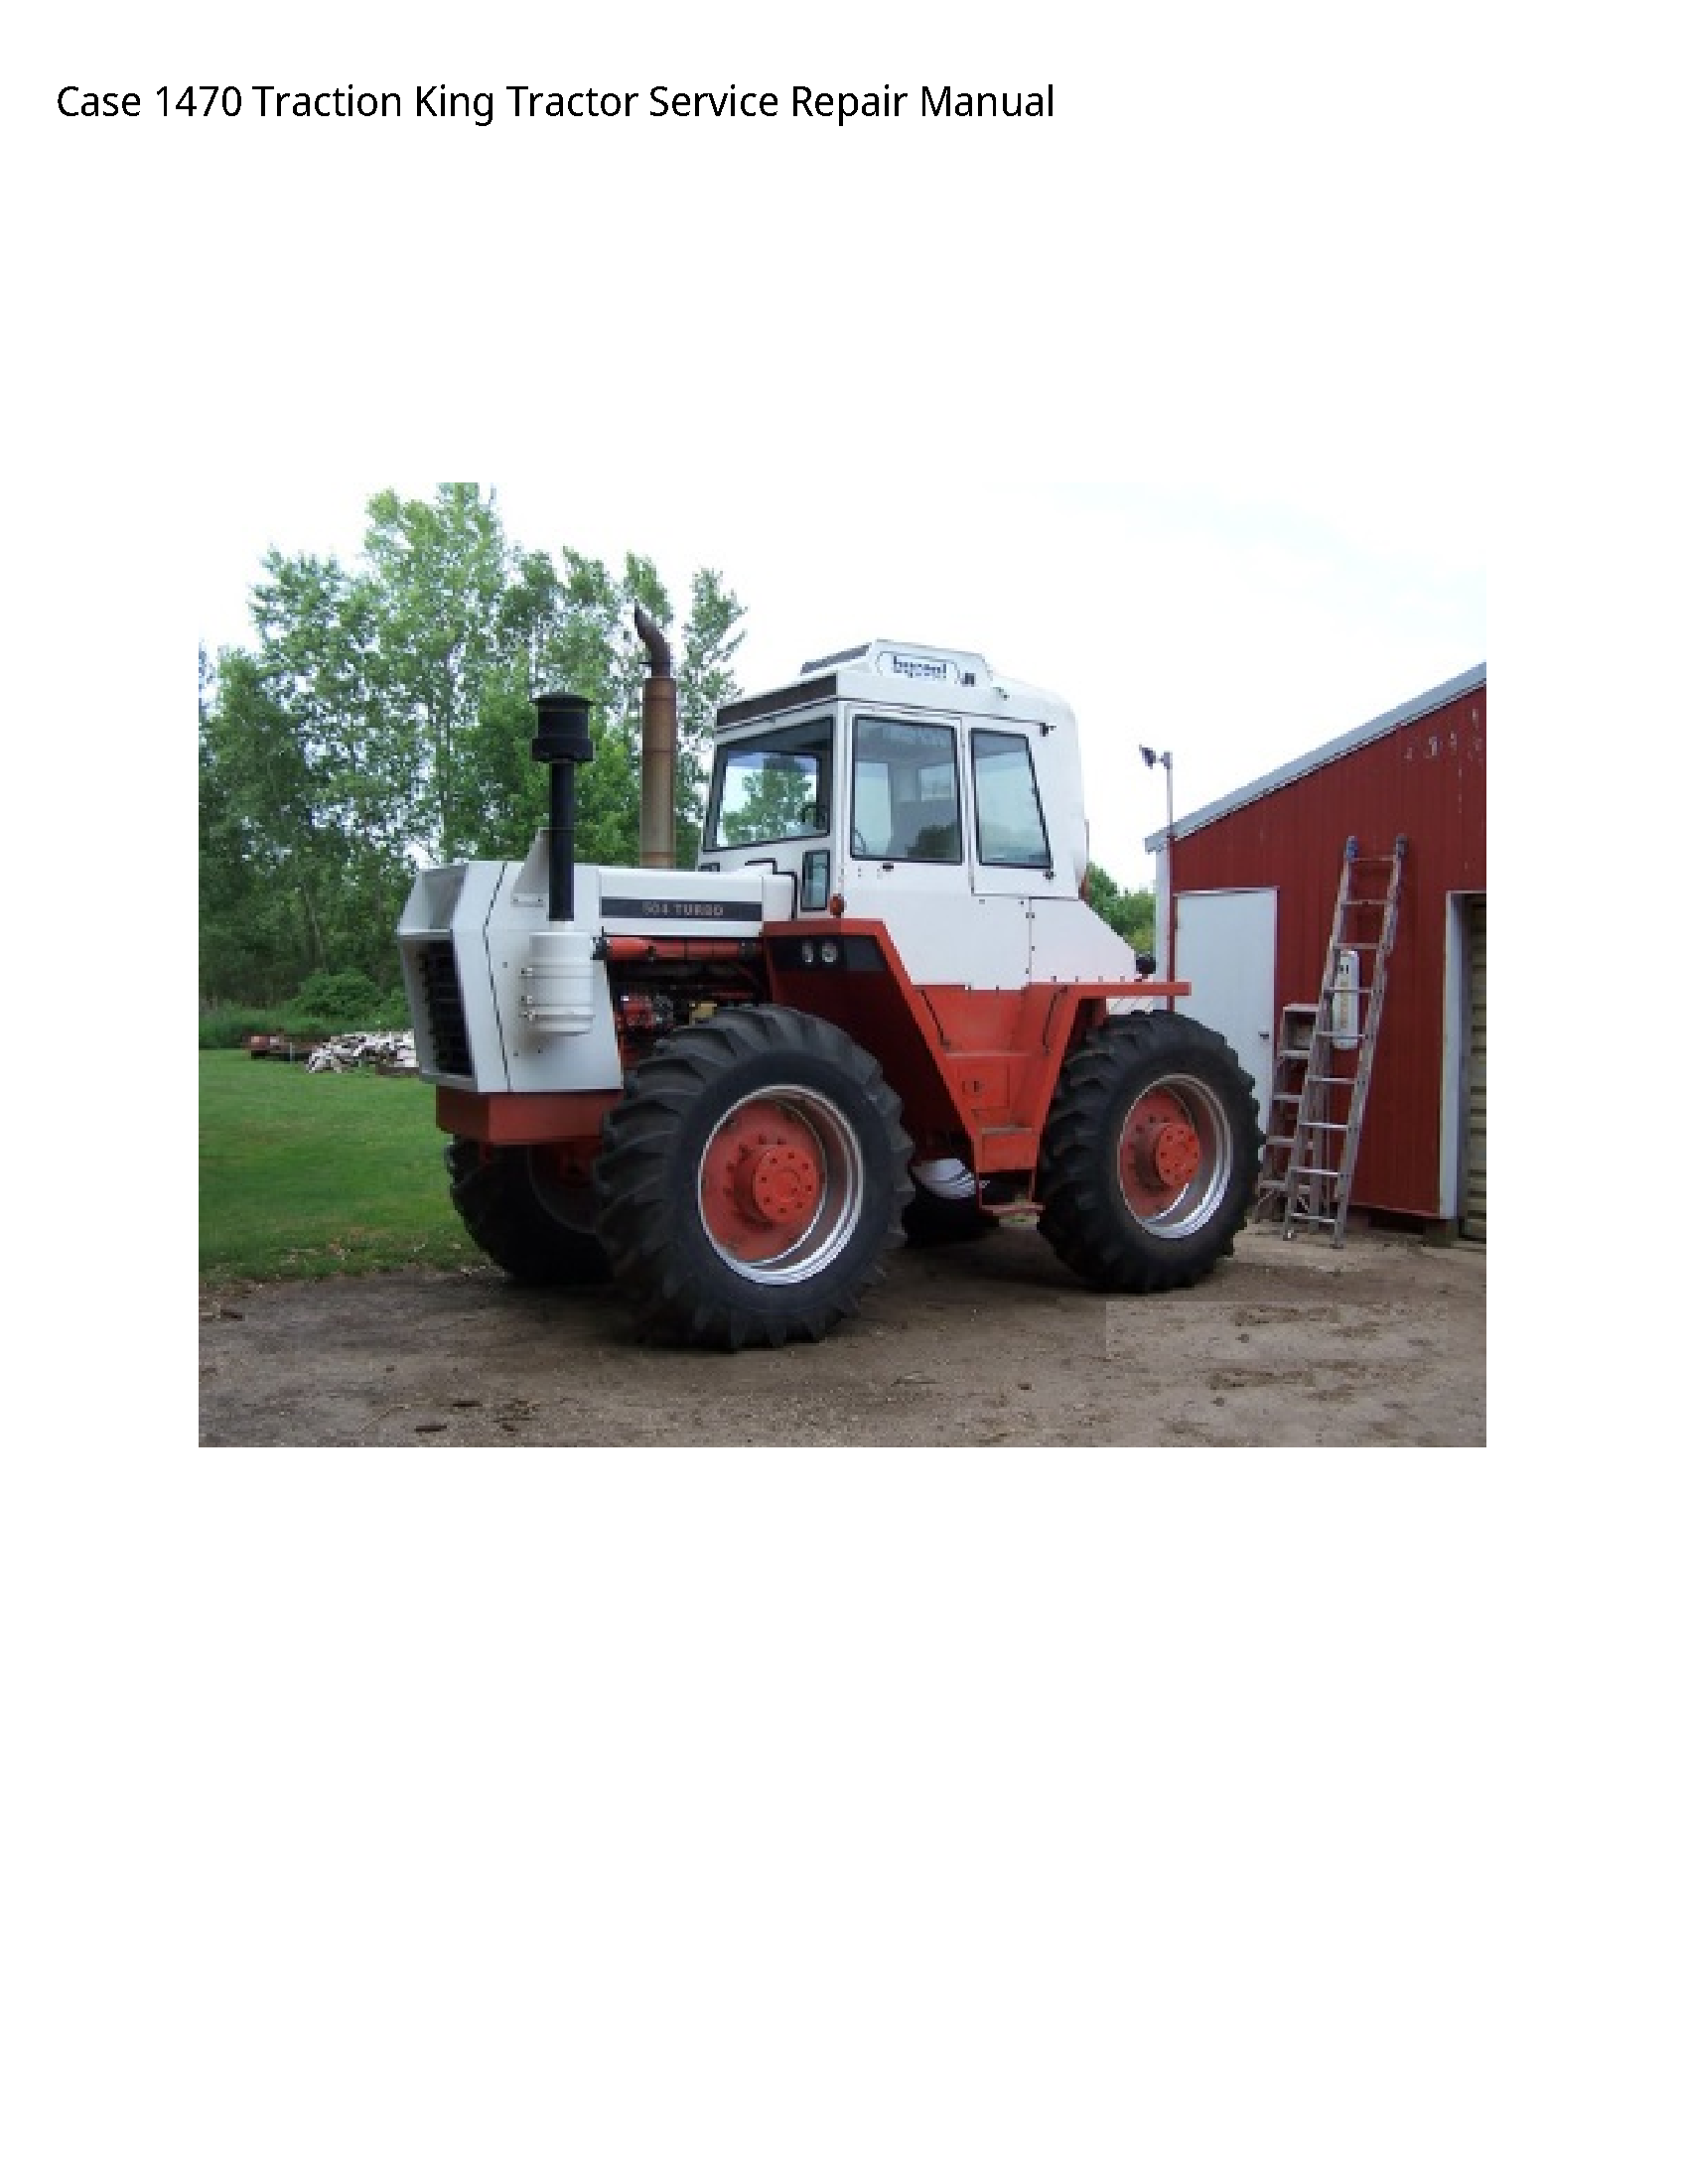 Case/Case IH 1470 Traction King Tractor manual